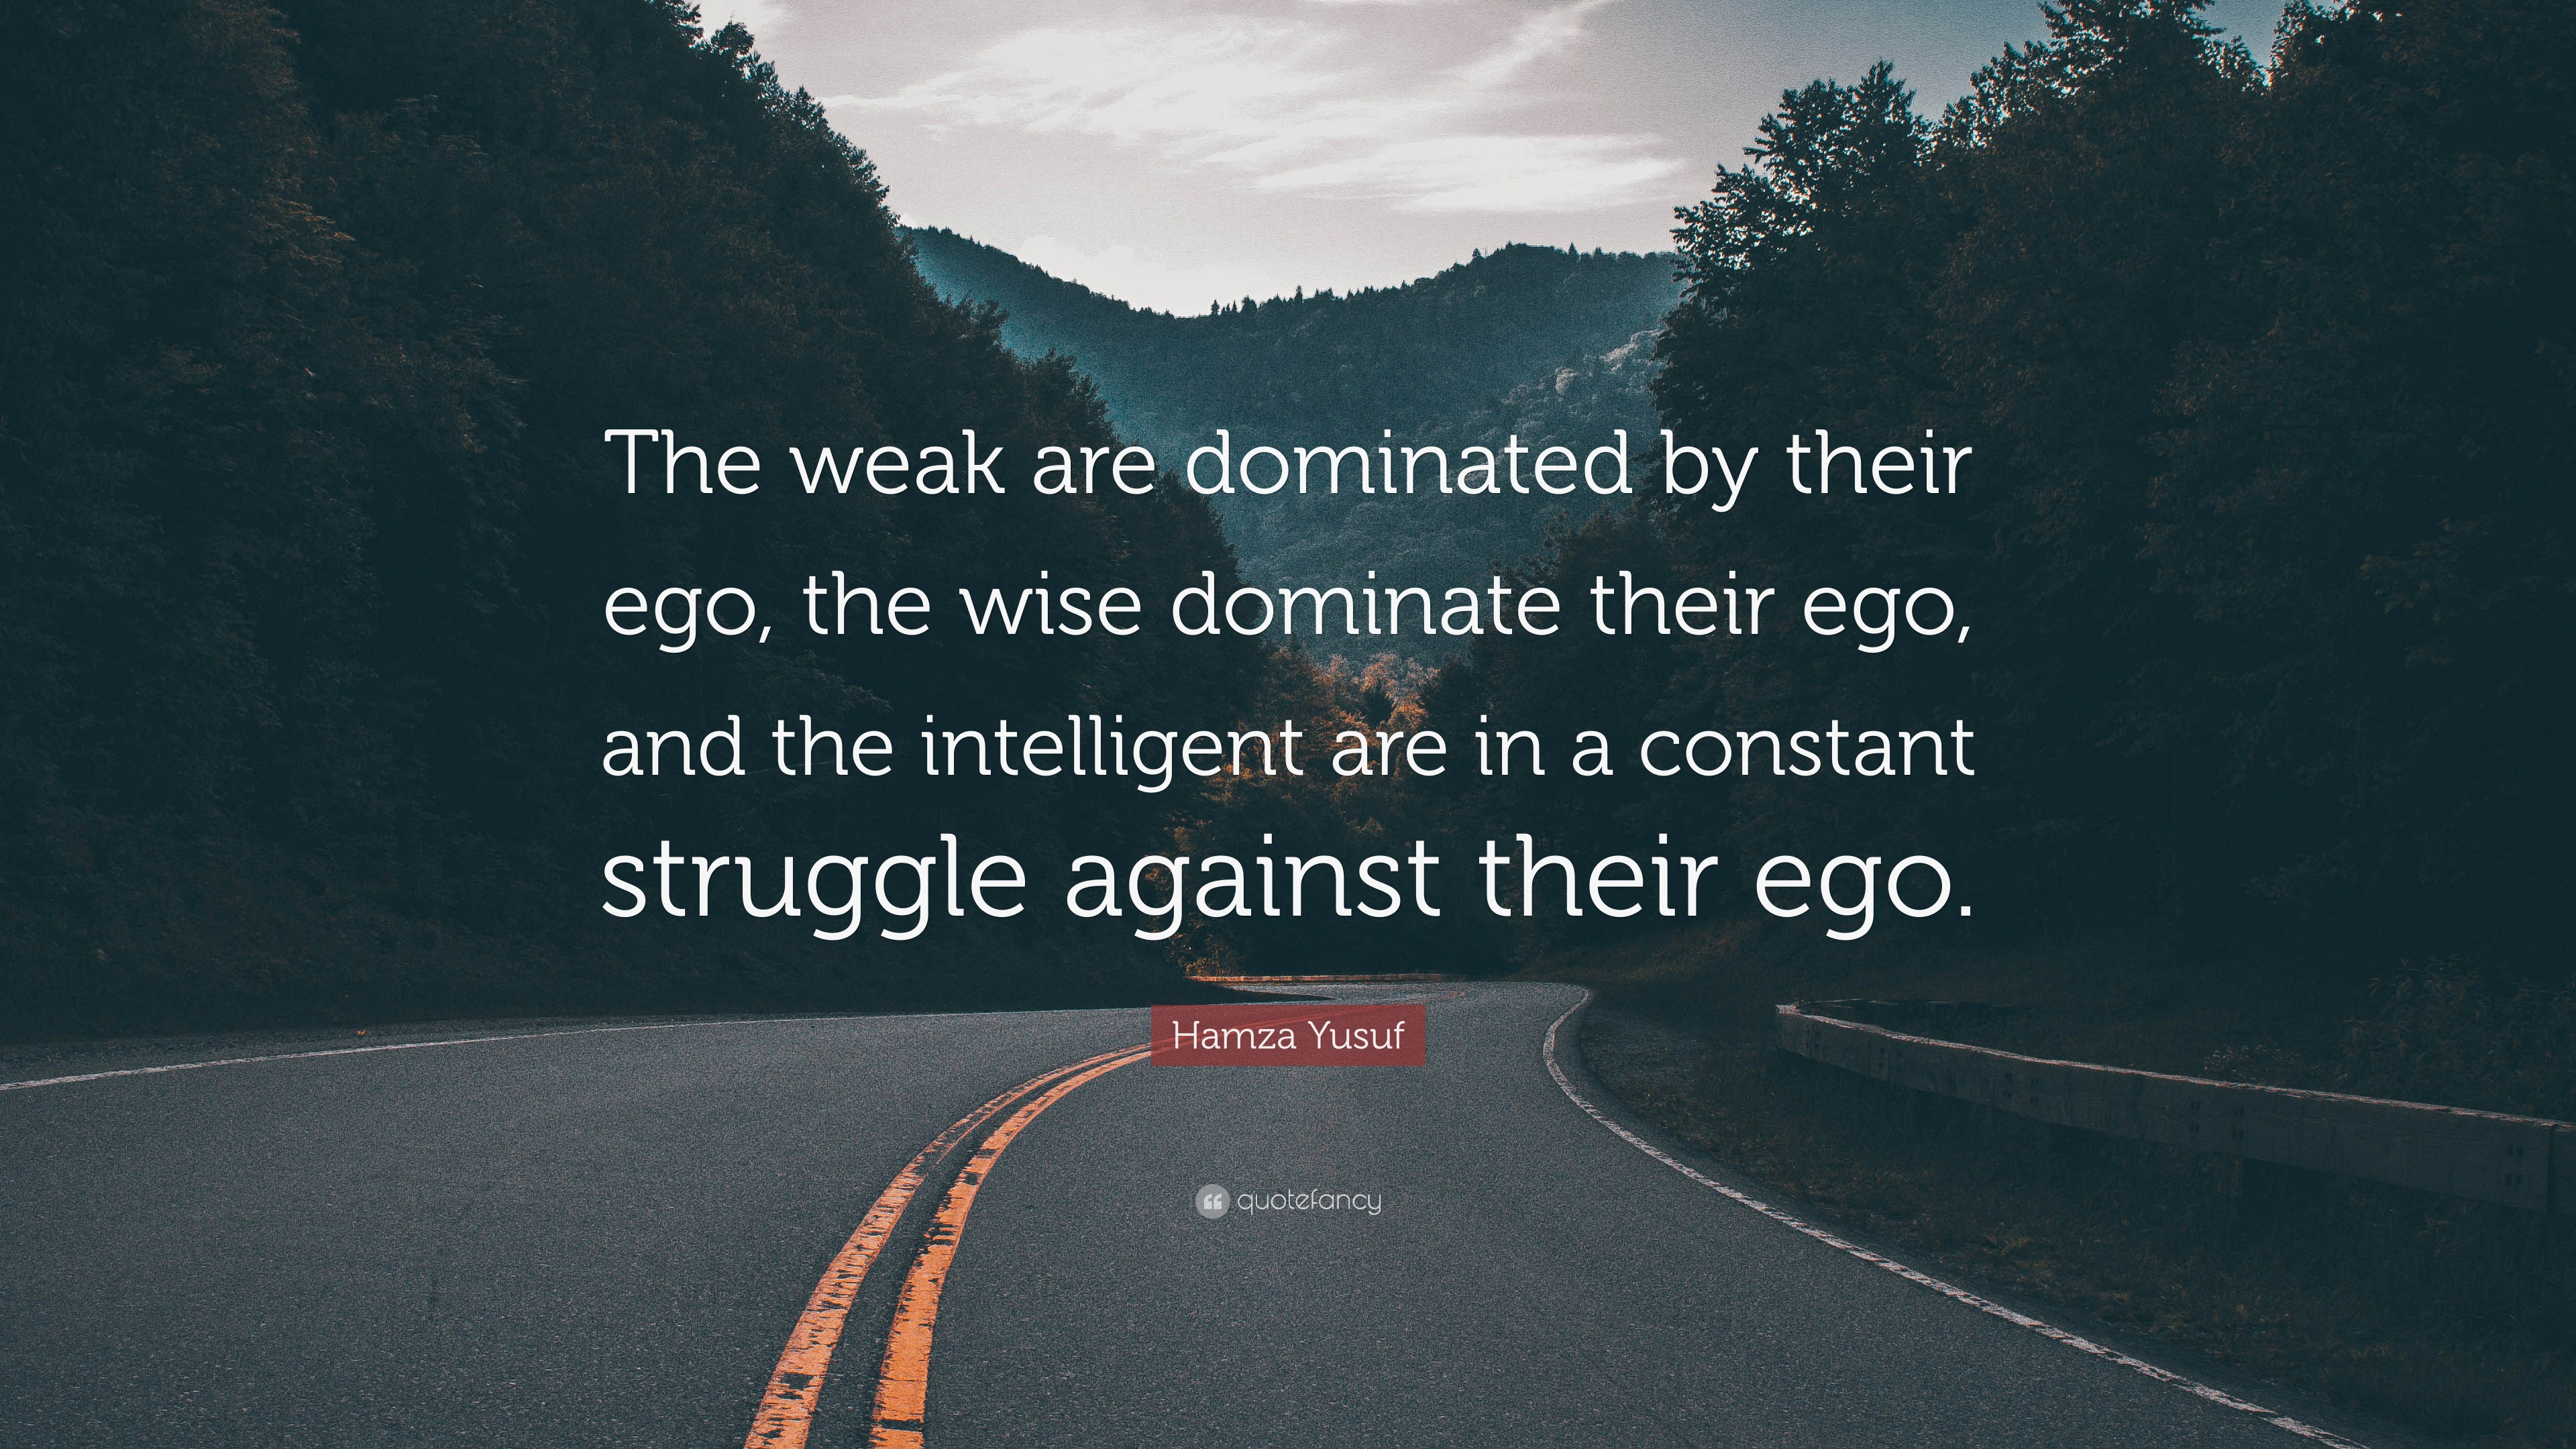 Hamza Yusuf Quote: "The weak are dominated by their ego, the wise.